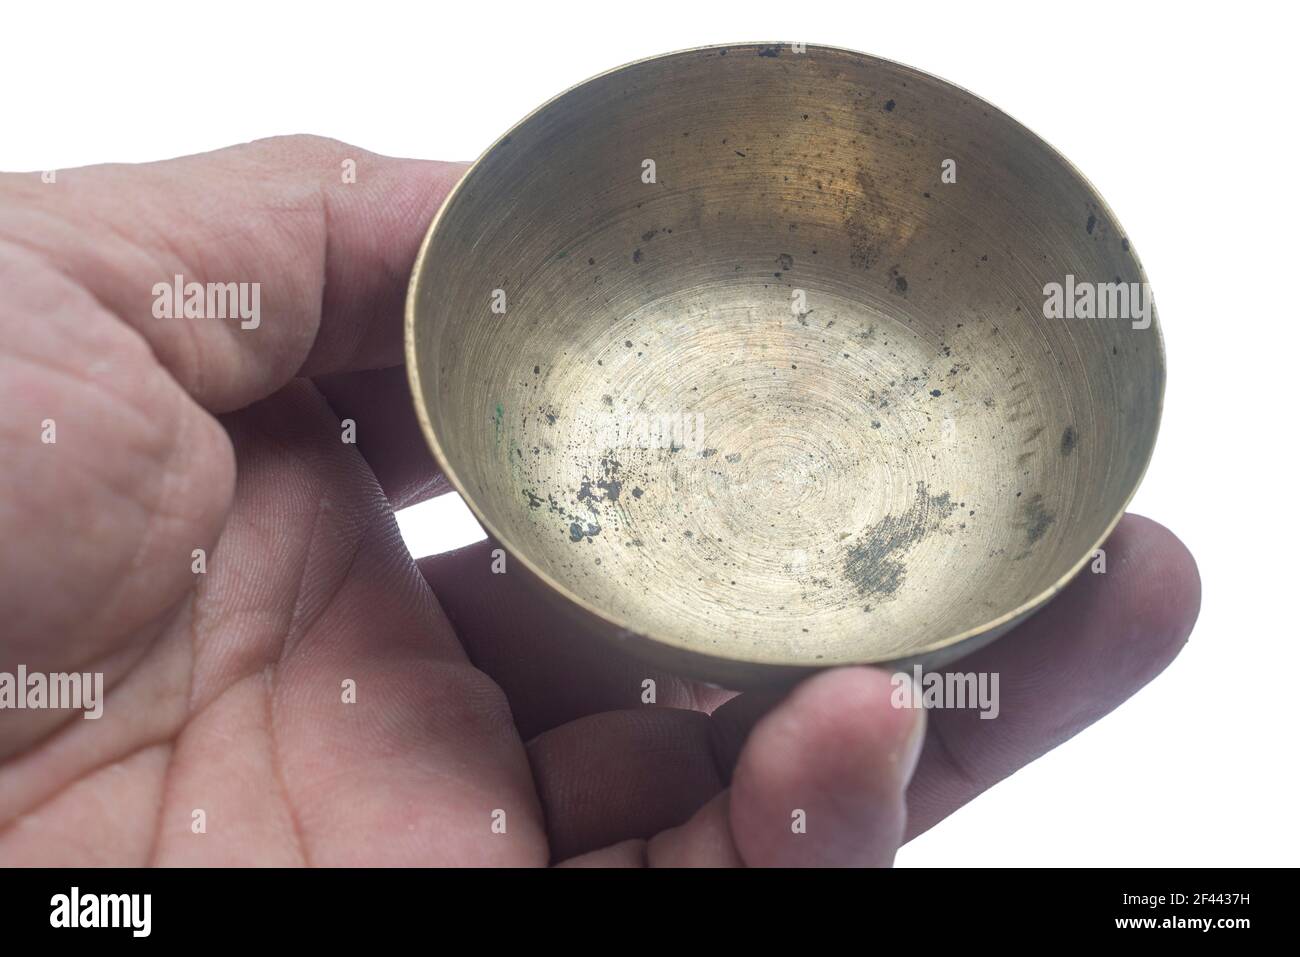 Khan long hin or stone-polished bronze bowls, are a type of traditional Thai handicraft. Stock Photo